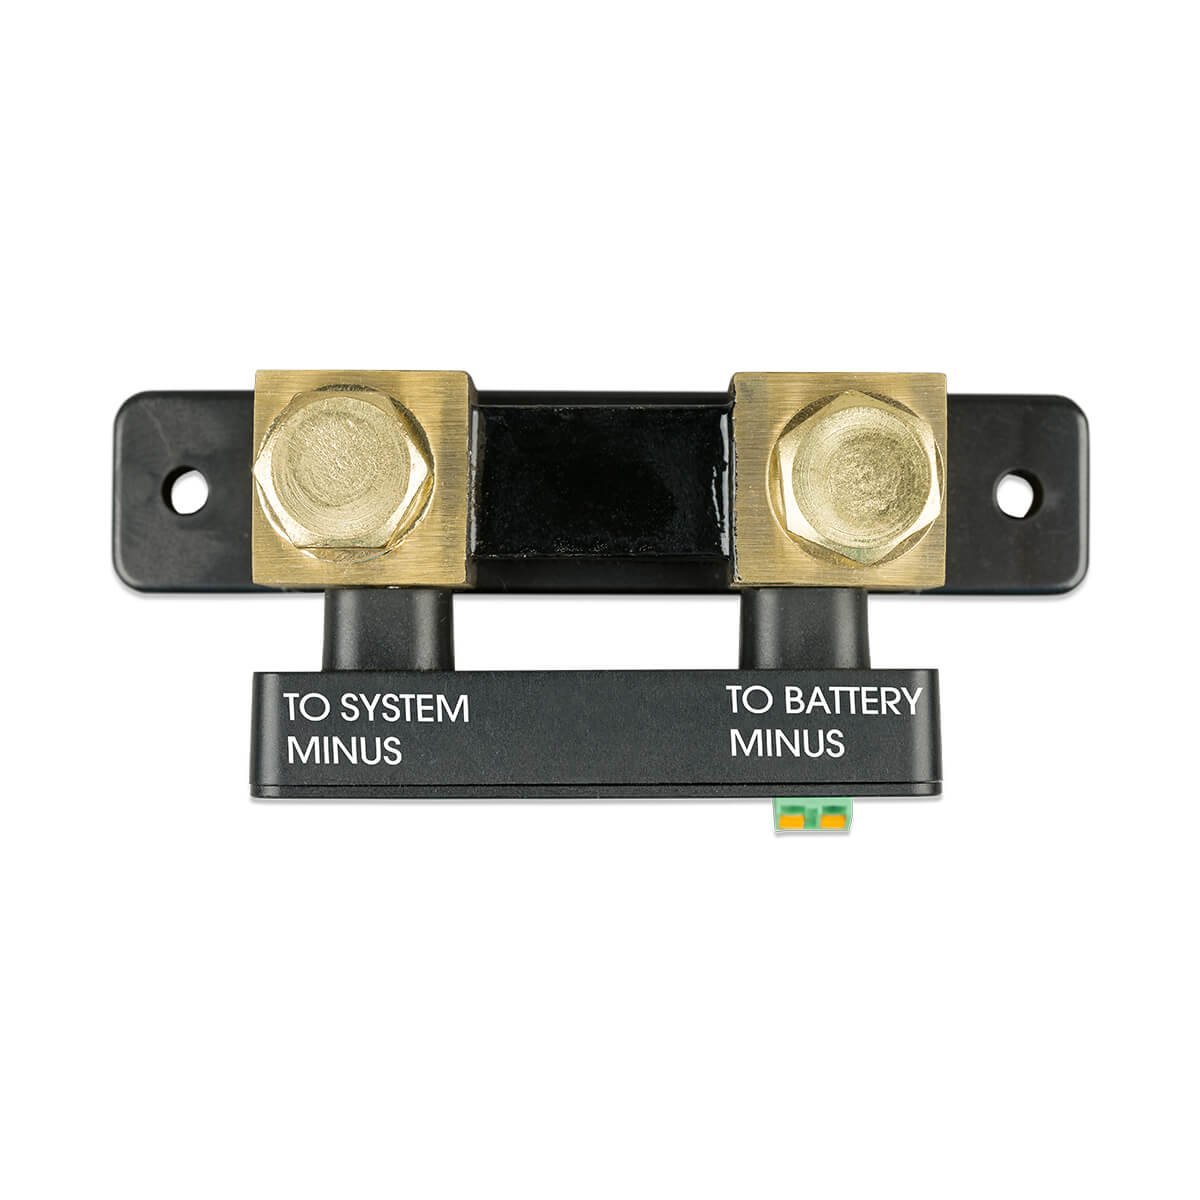 The Victron SmartShunt 500A Battery Monitor features a black shunt resistor with two brass bolts, labeled "TO SYSTEM MINUS" and "TO BATTERY MINUS," on a white background.